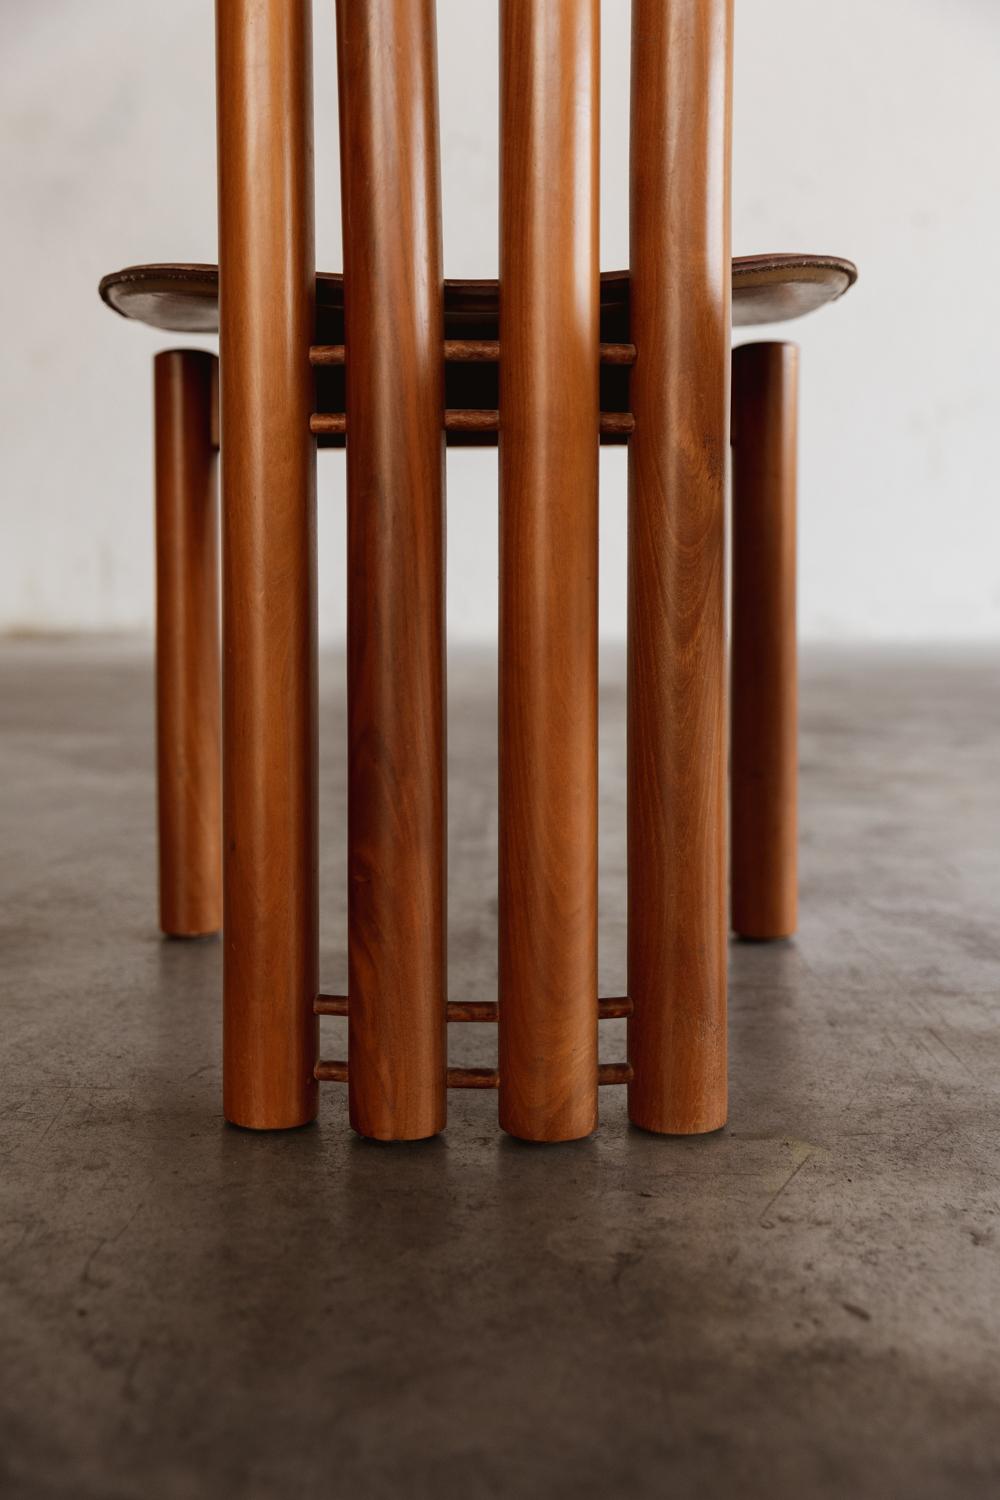 Mid-Century Modern Mario Marenco “Sapporo” Dining Chairs for Mobil Girgi, 1970, set of 4 For Sale